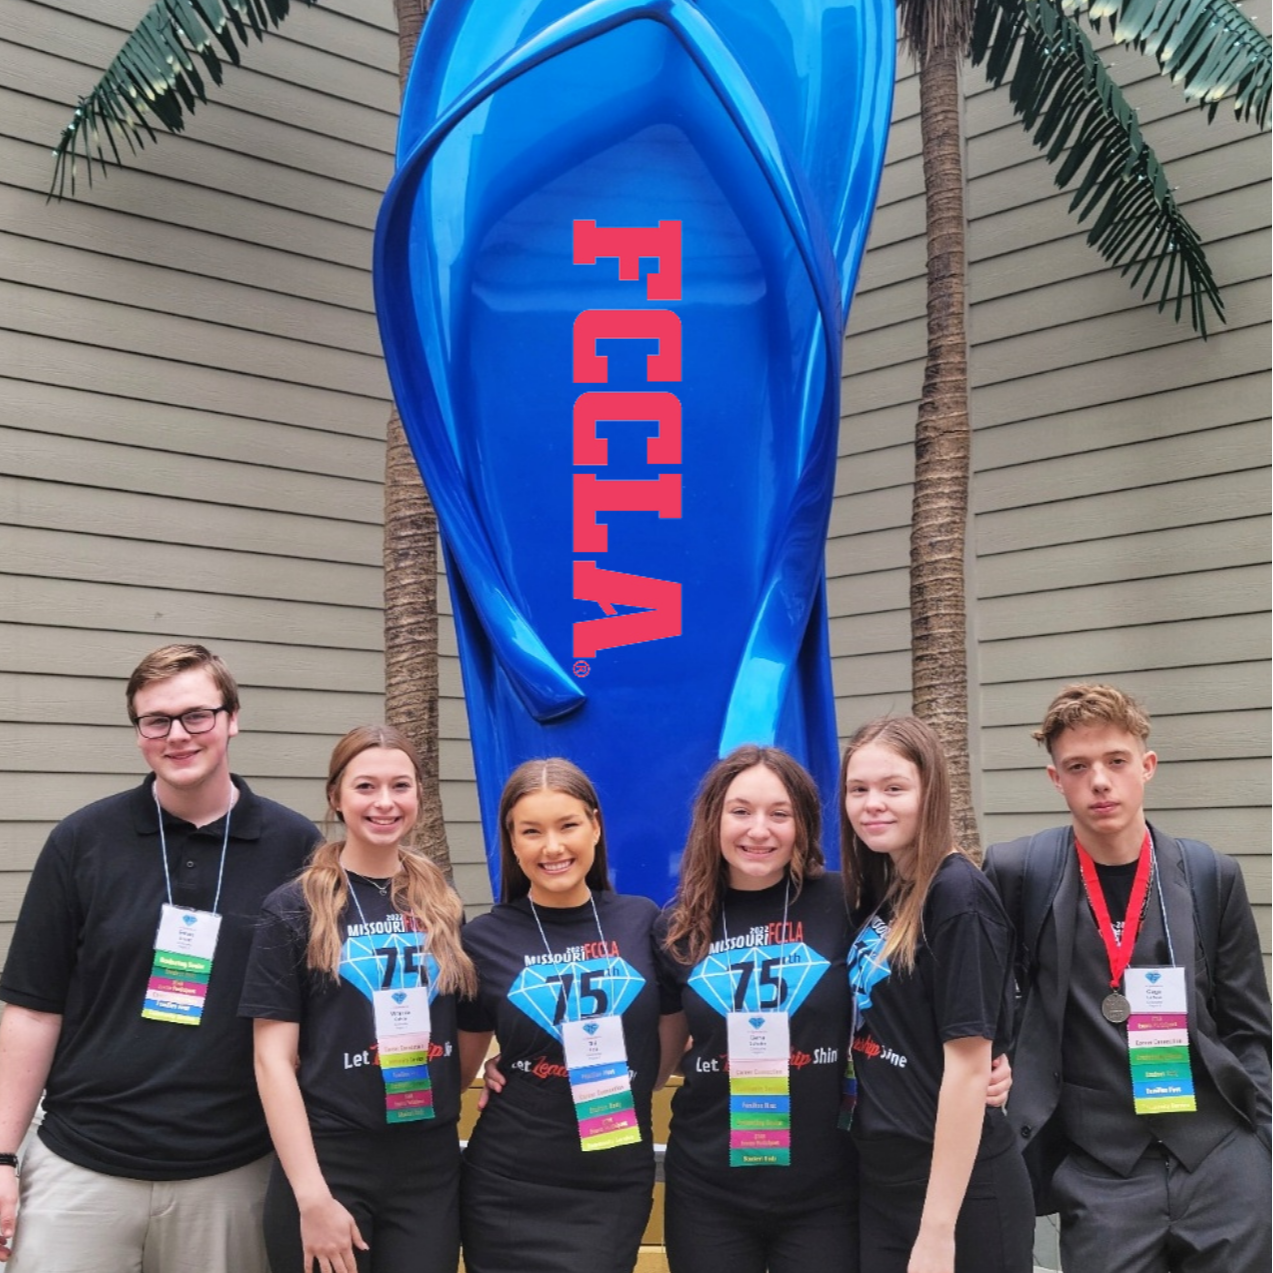 student pose with large blue flip flop at state fccla competition